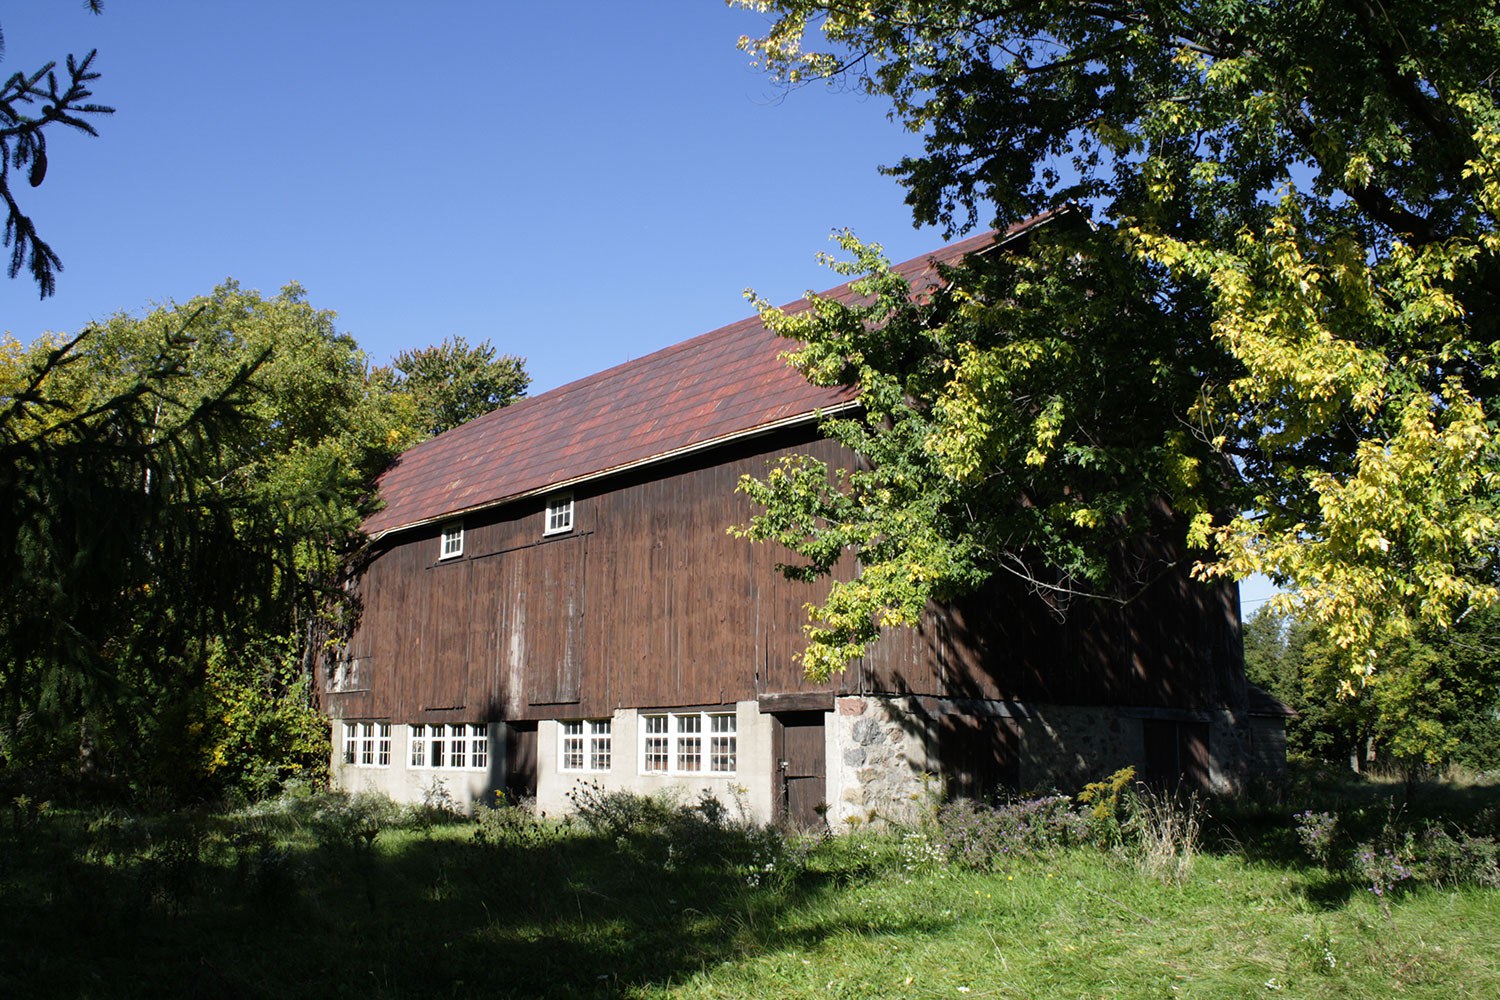 A 19th-century barn in Richmond Hill (now demolished).